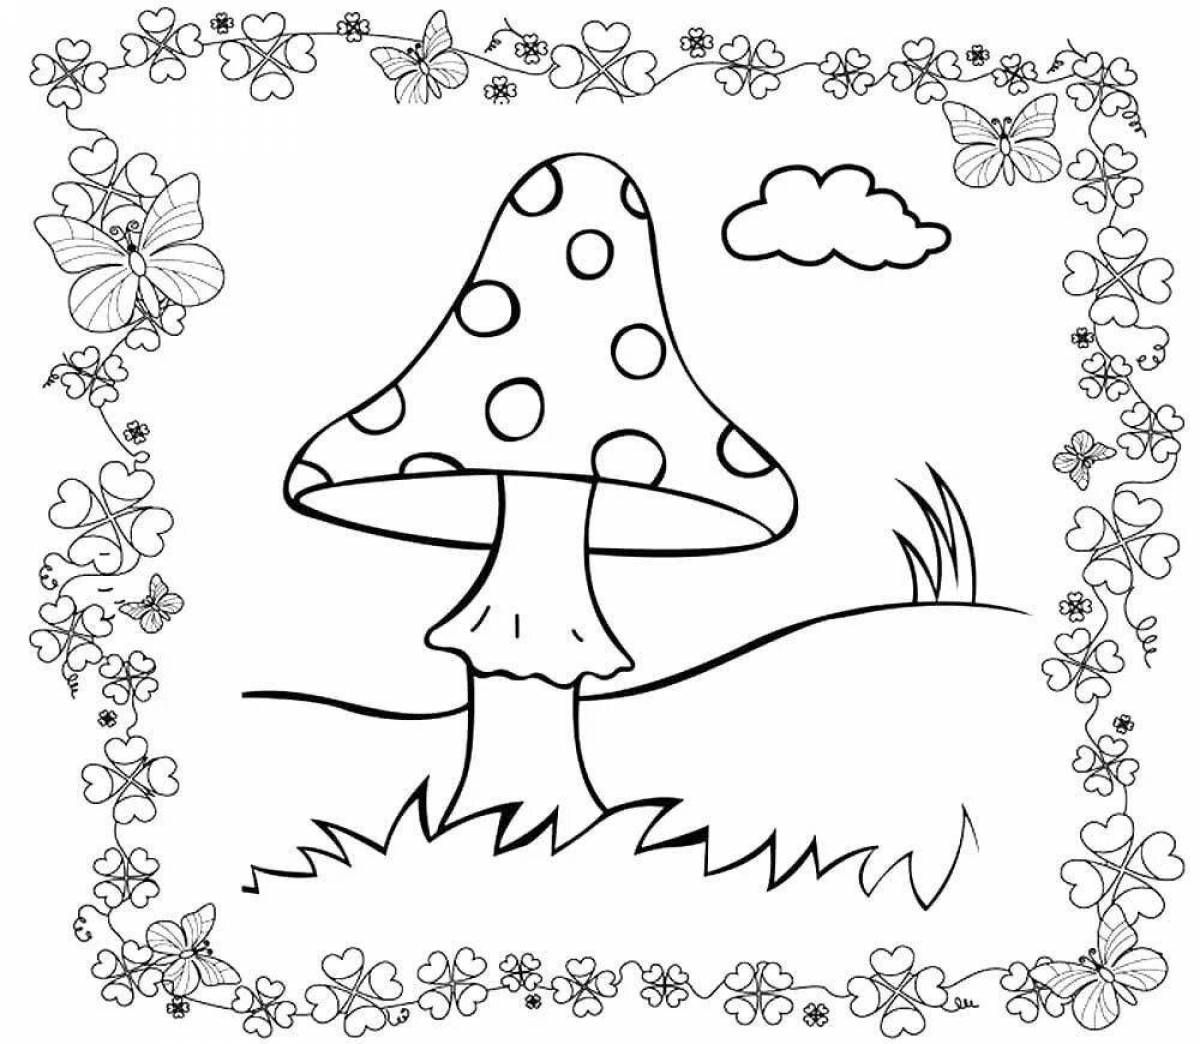 Coloring book decorated fly agaric